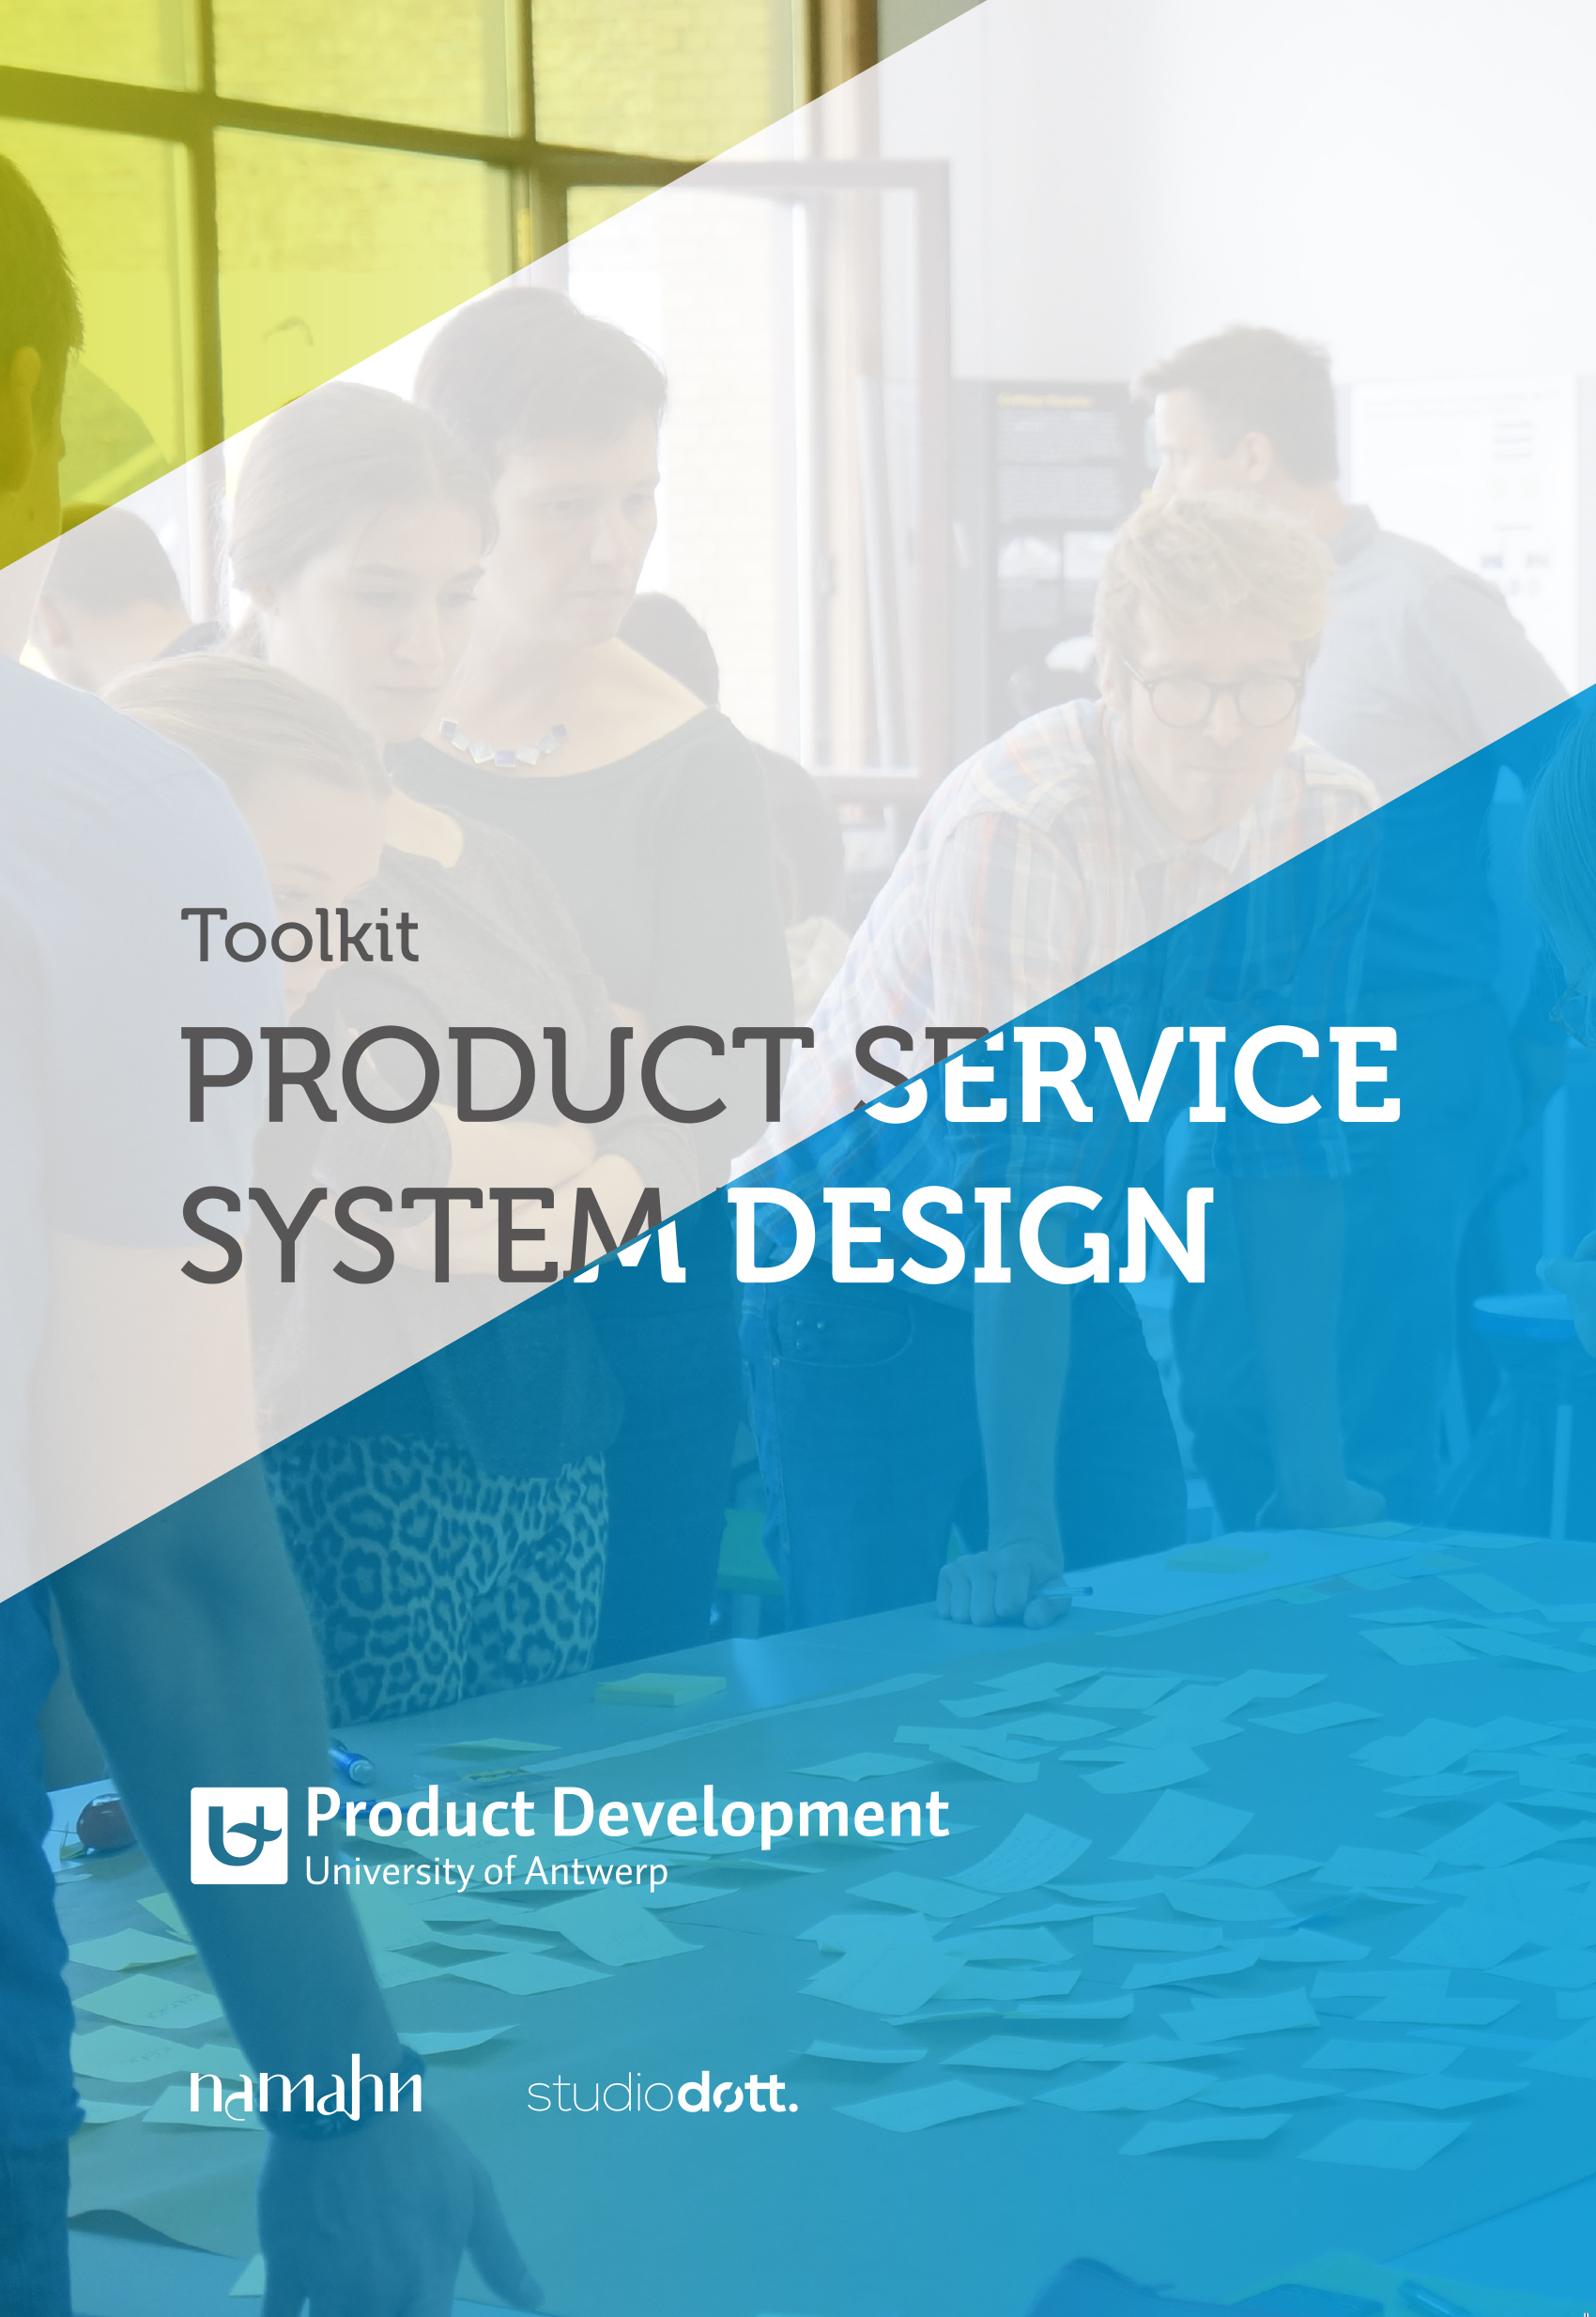 PSS DESIGN AND STRATEGIC ROLLOUT